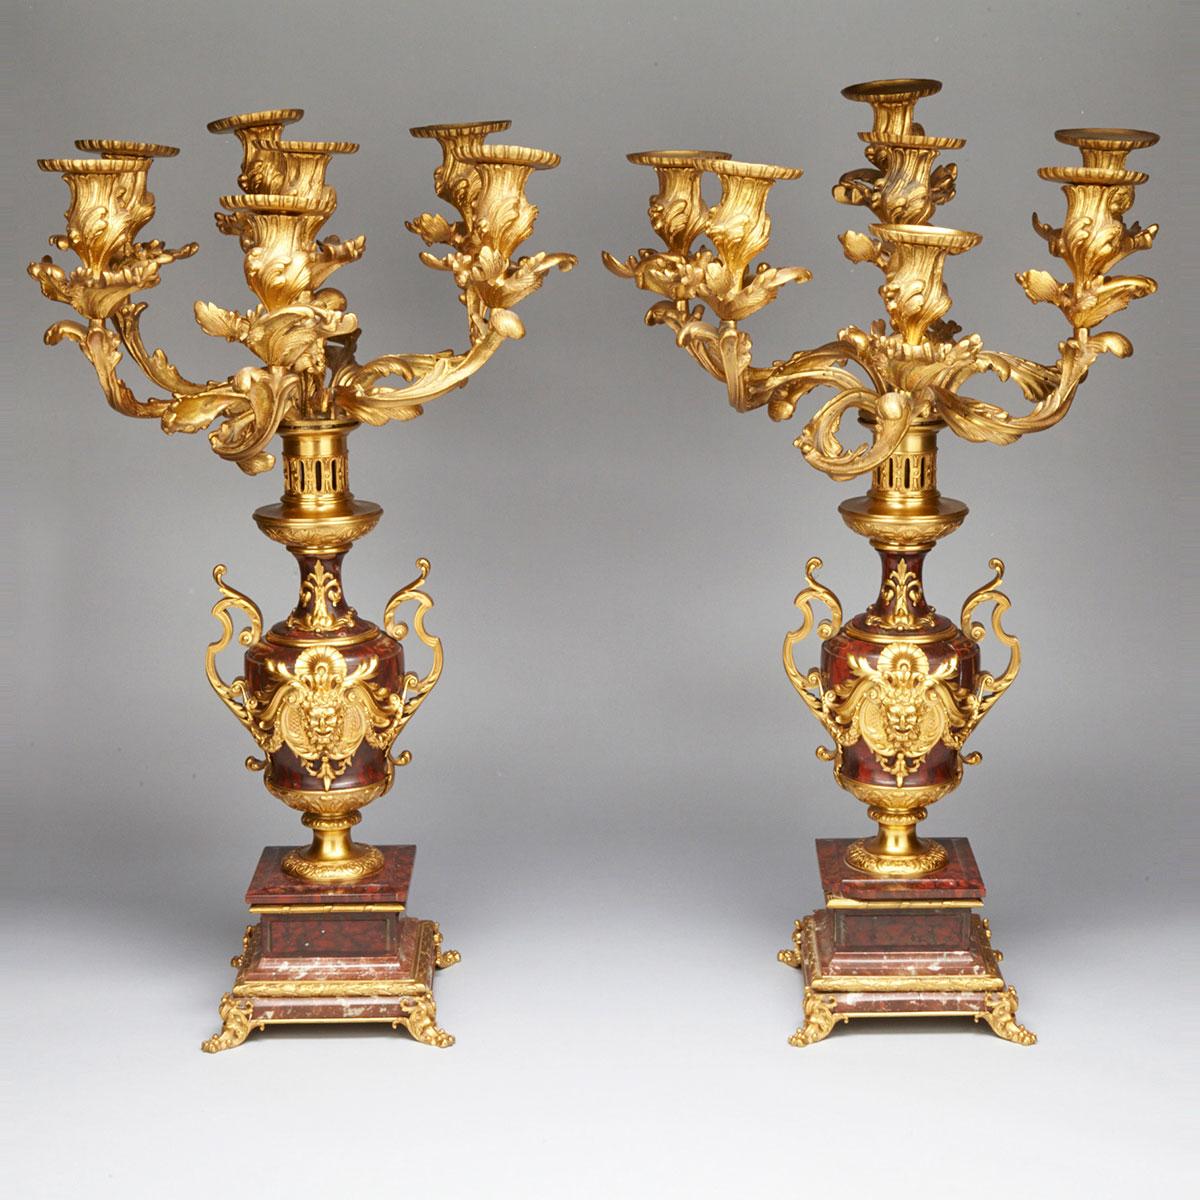 Pair of Massive French Gilt Bronze Mounted Rouge Griotte 7 Light Candelabra, early-mid 20th century